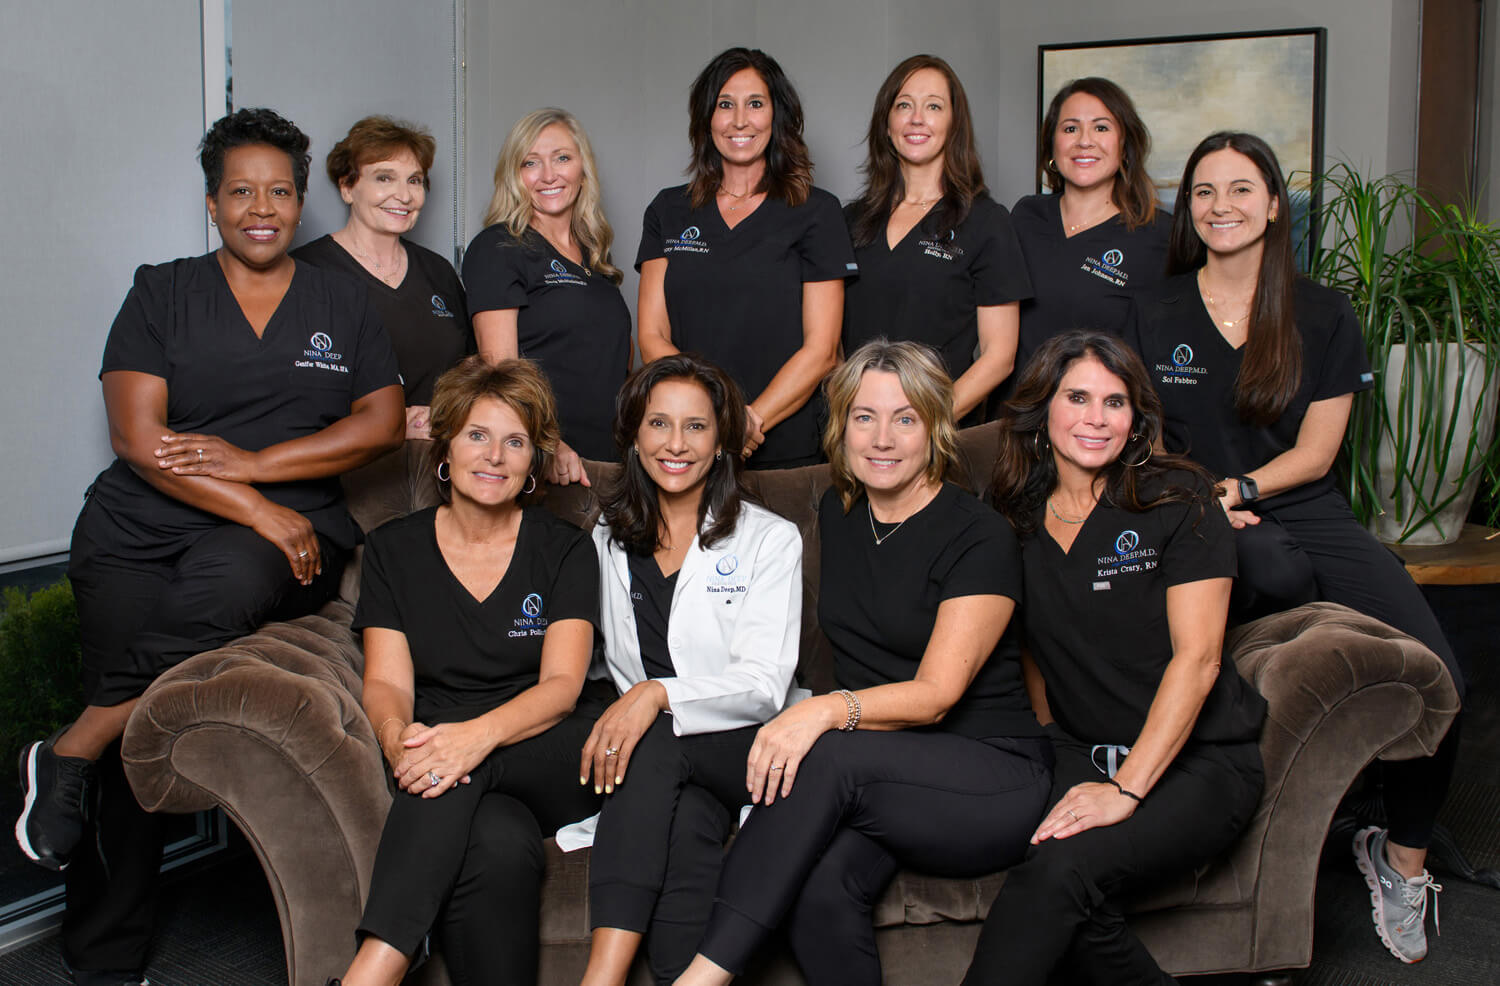 Dr. Nina Deep, MD and her staff